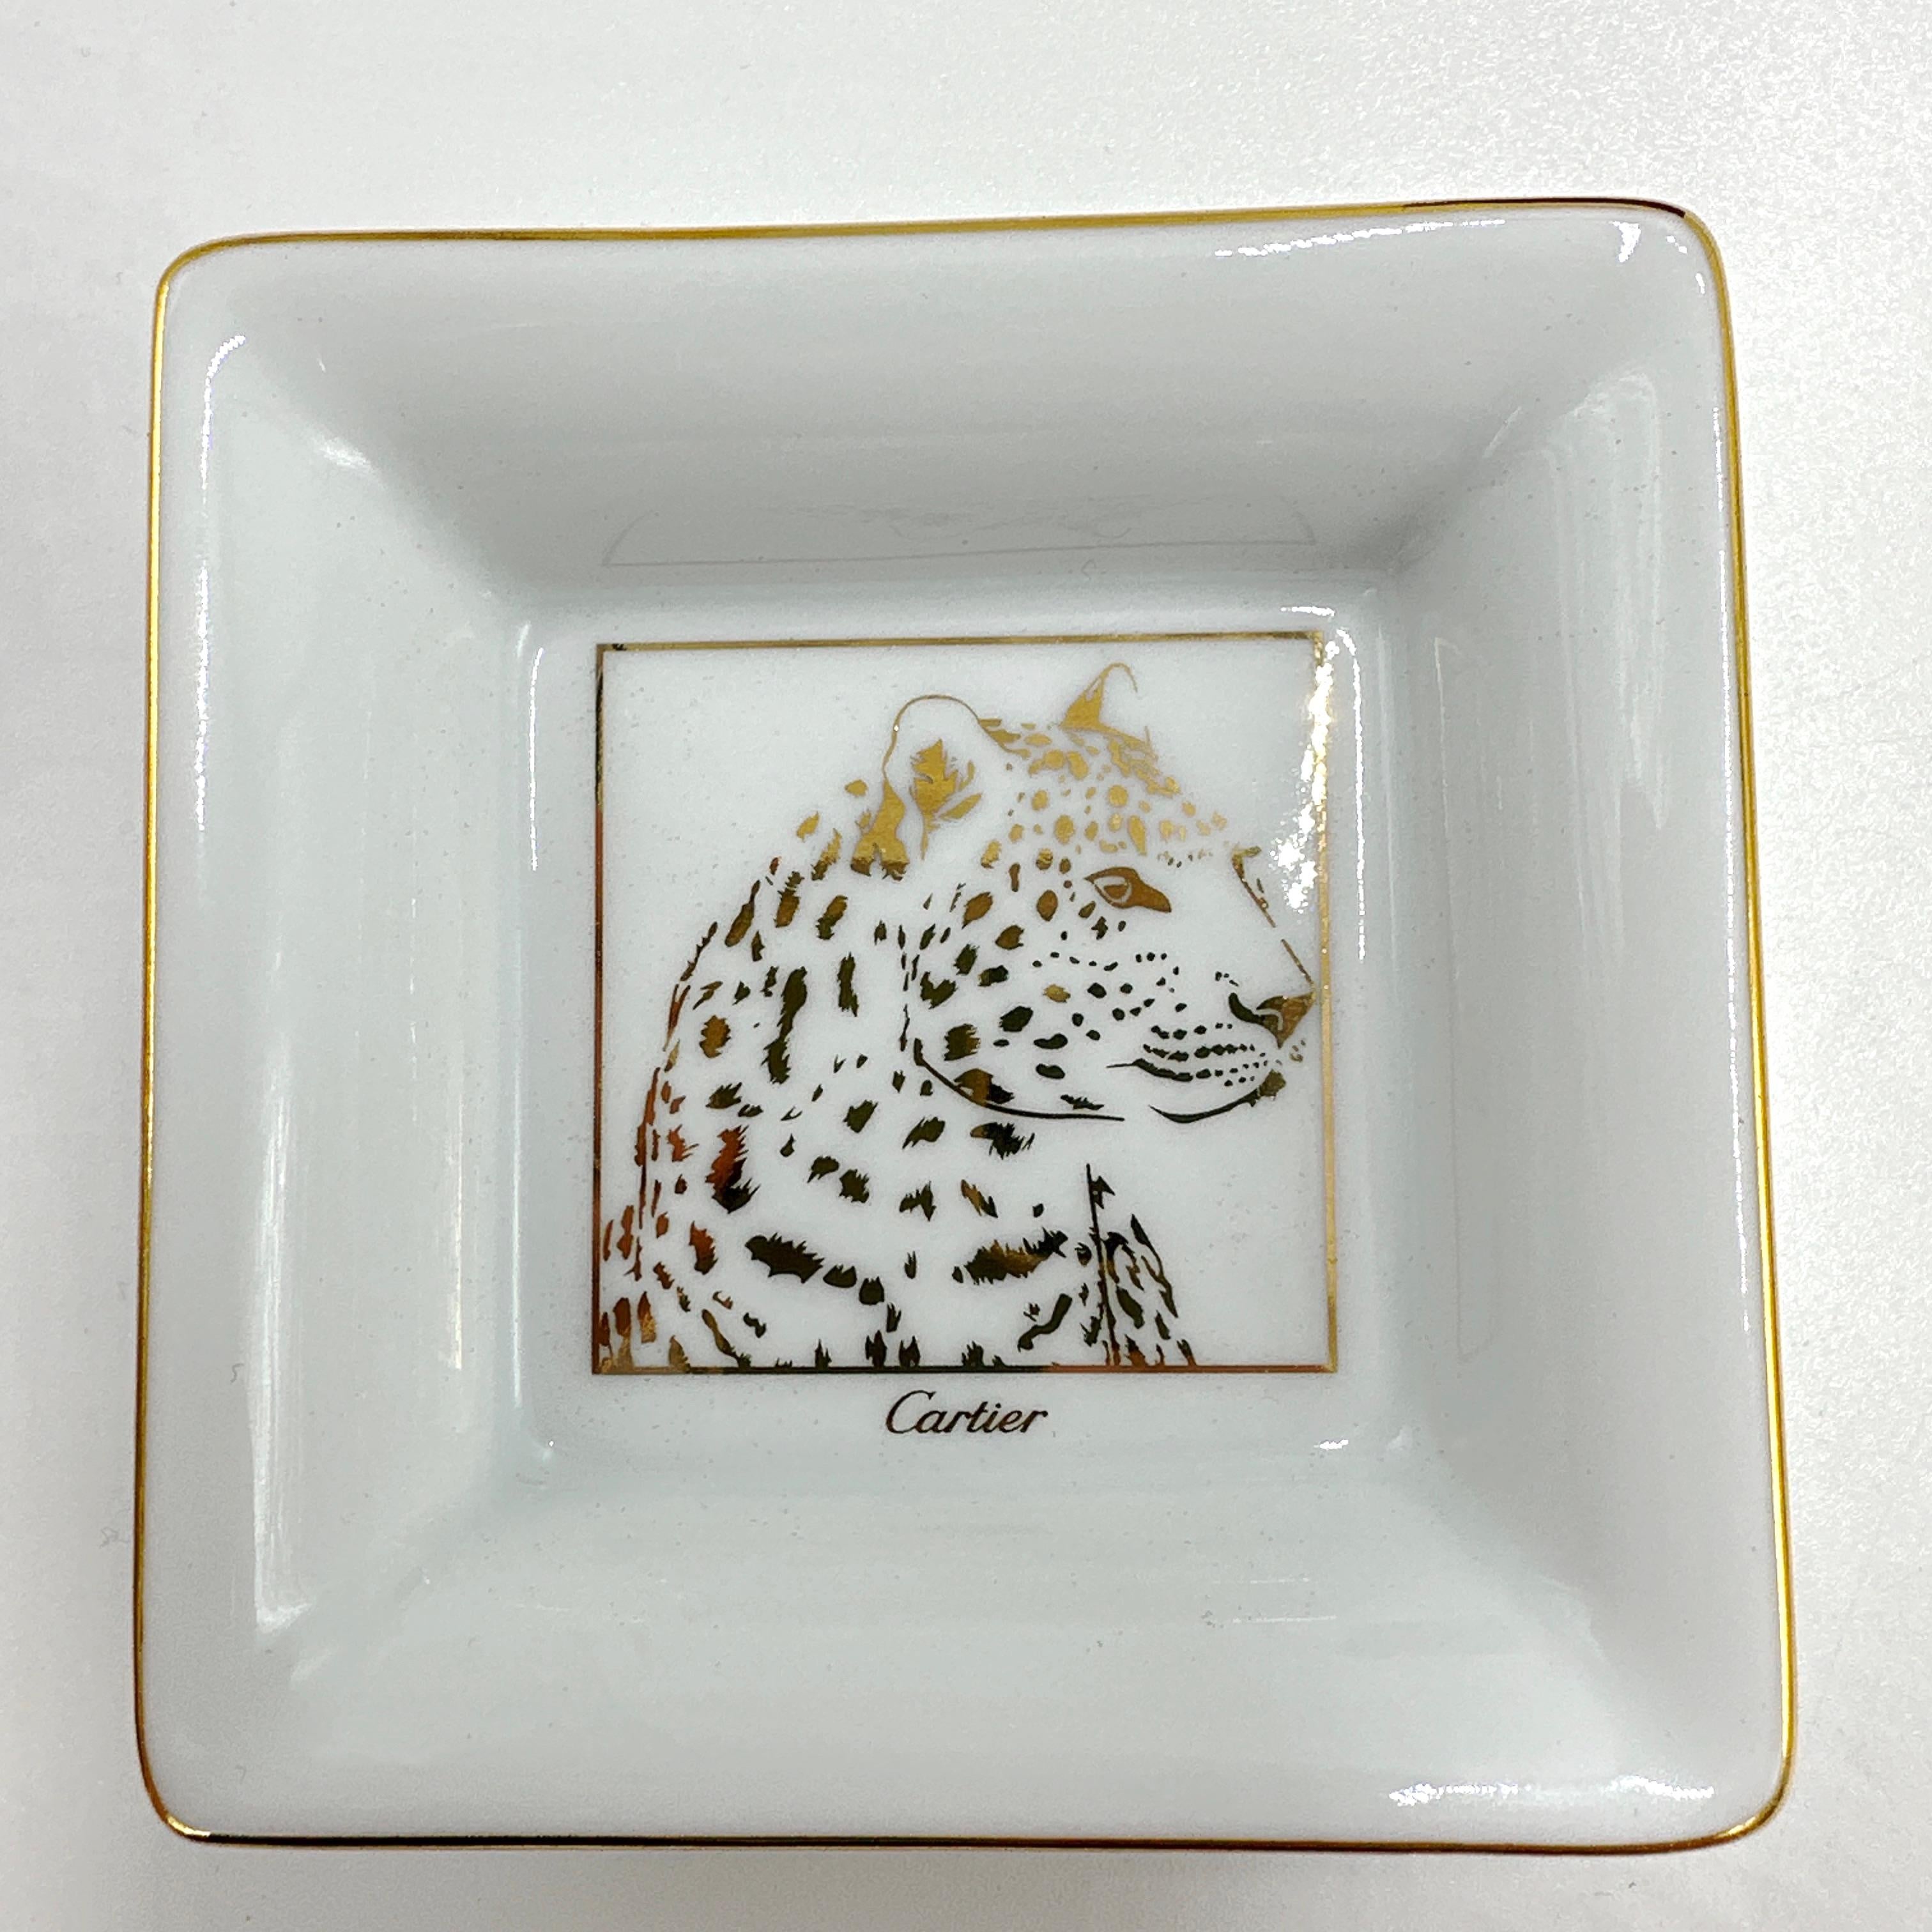 Contemporary CARTIER Panther Motif Porcelain Trinket Tray